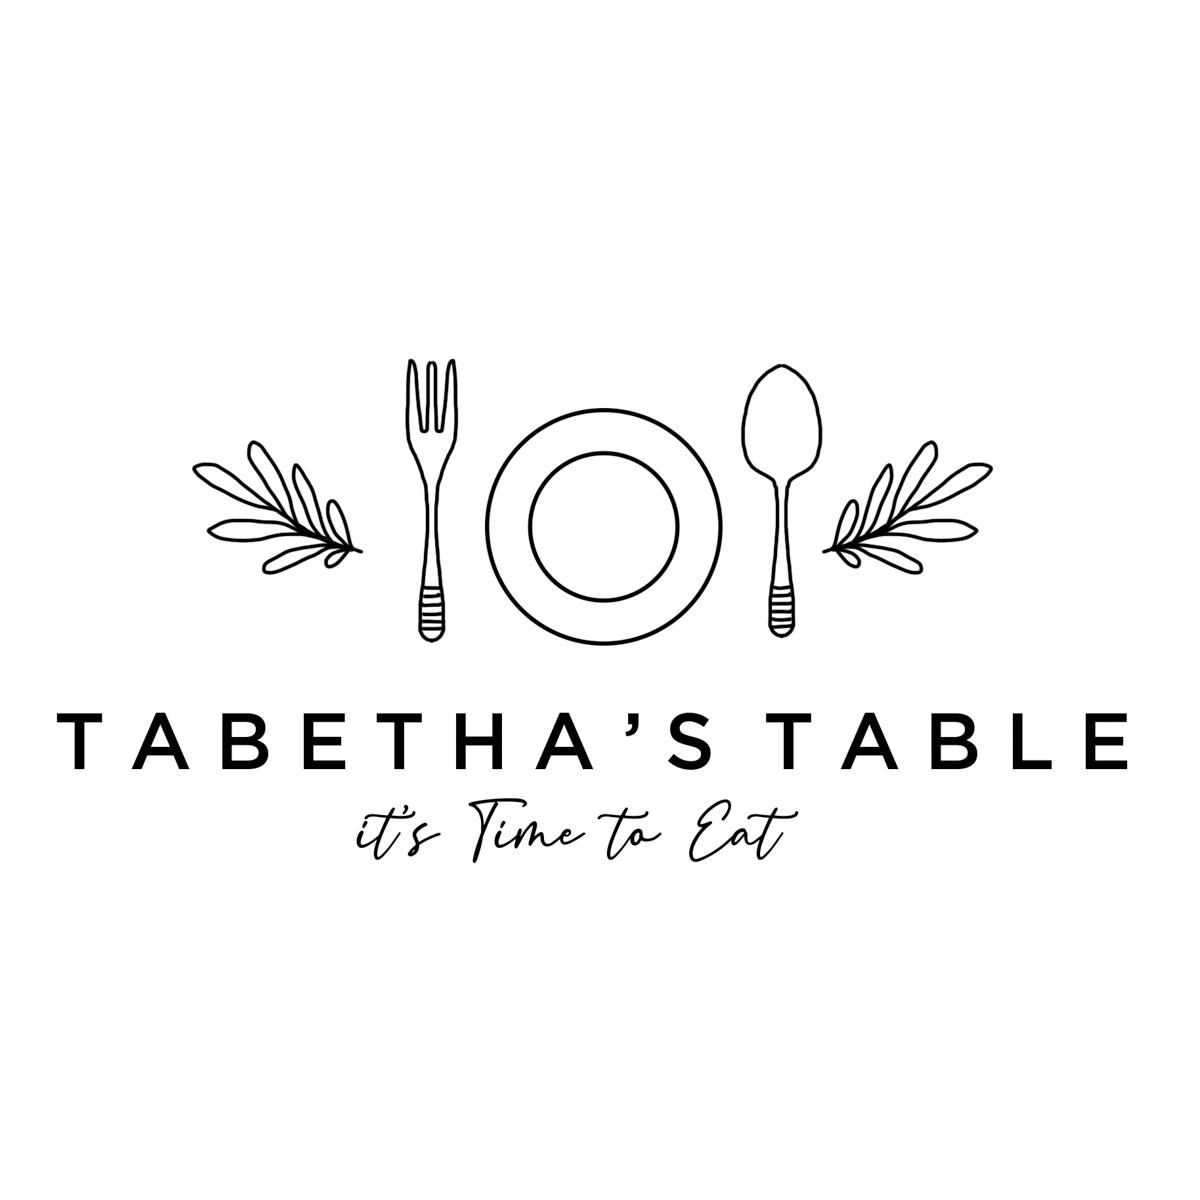 Tabetha’s Table's images